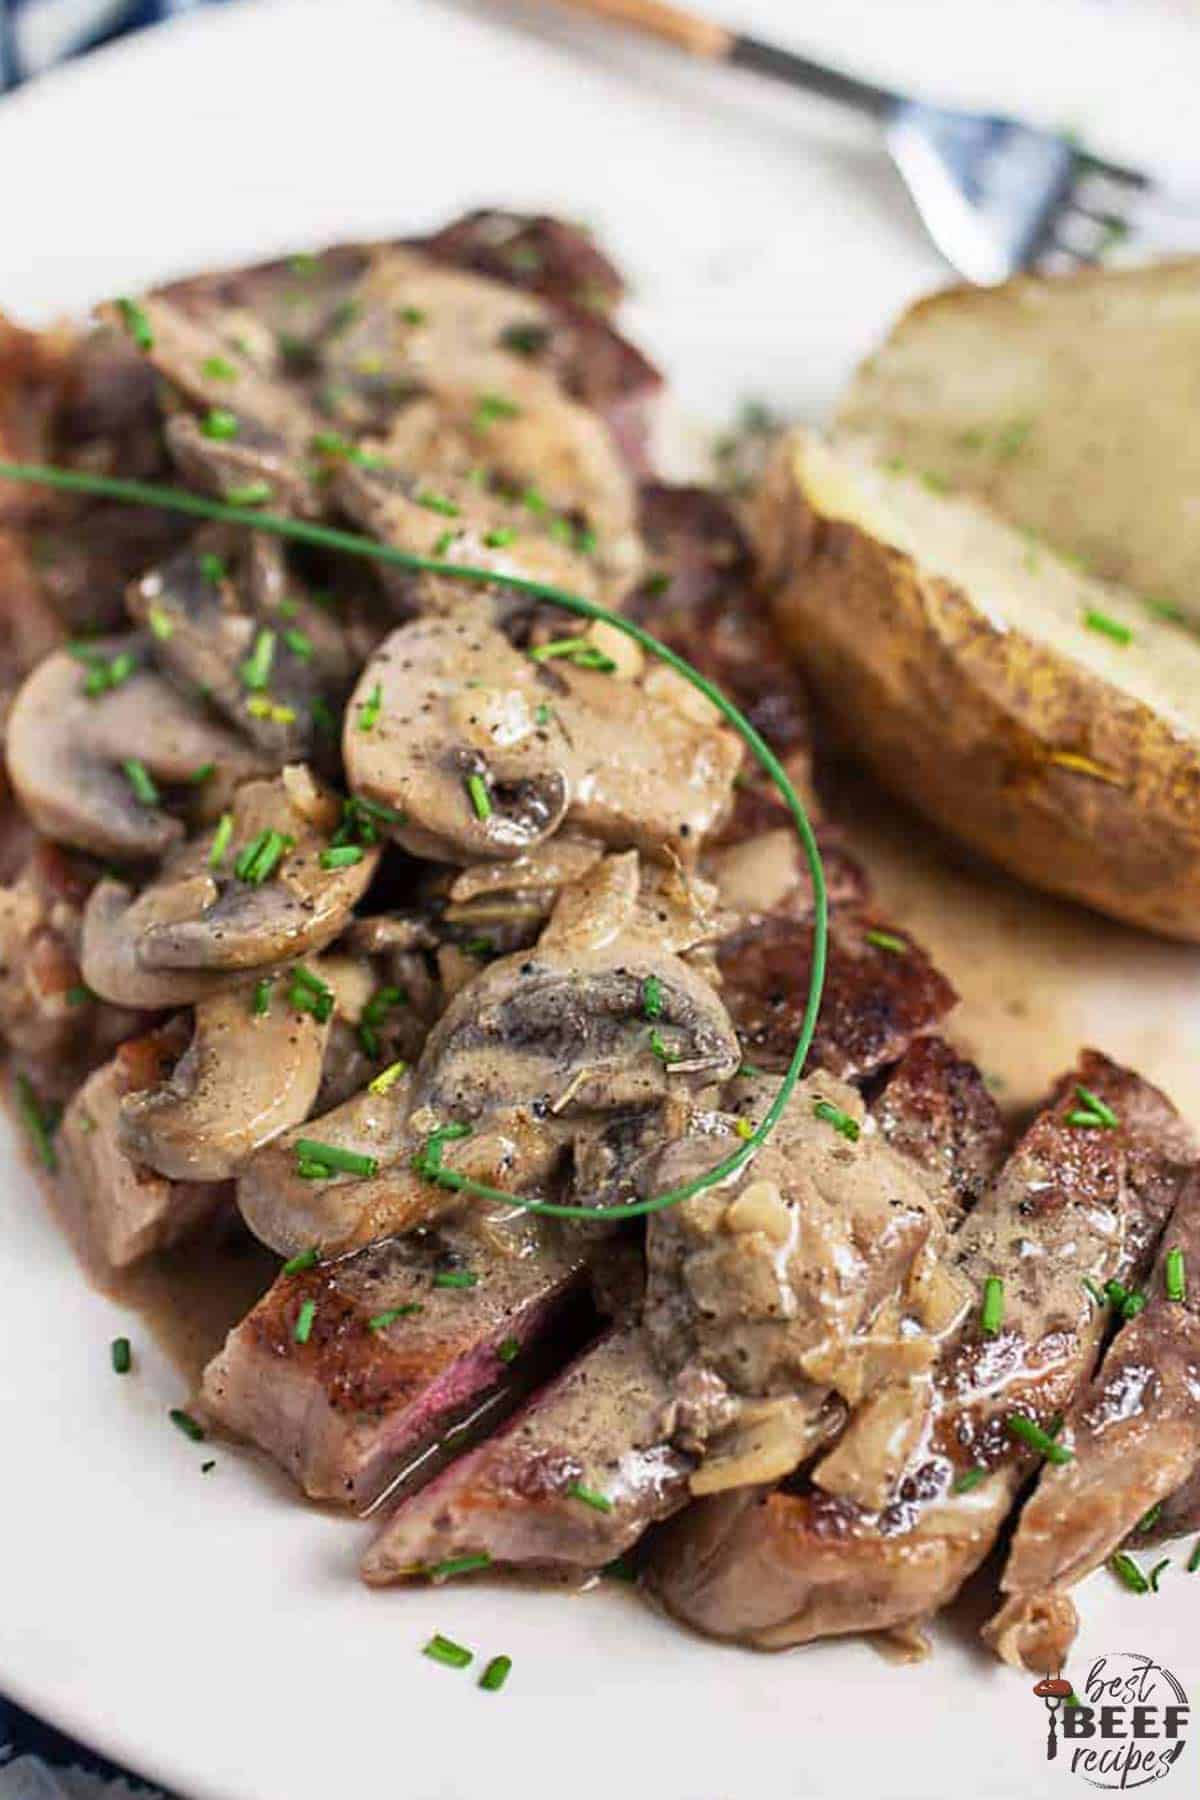 Steak diane on a white plate with potatoes